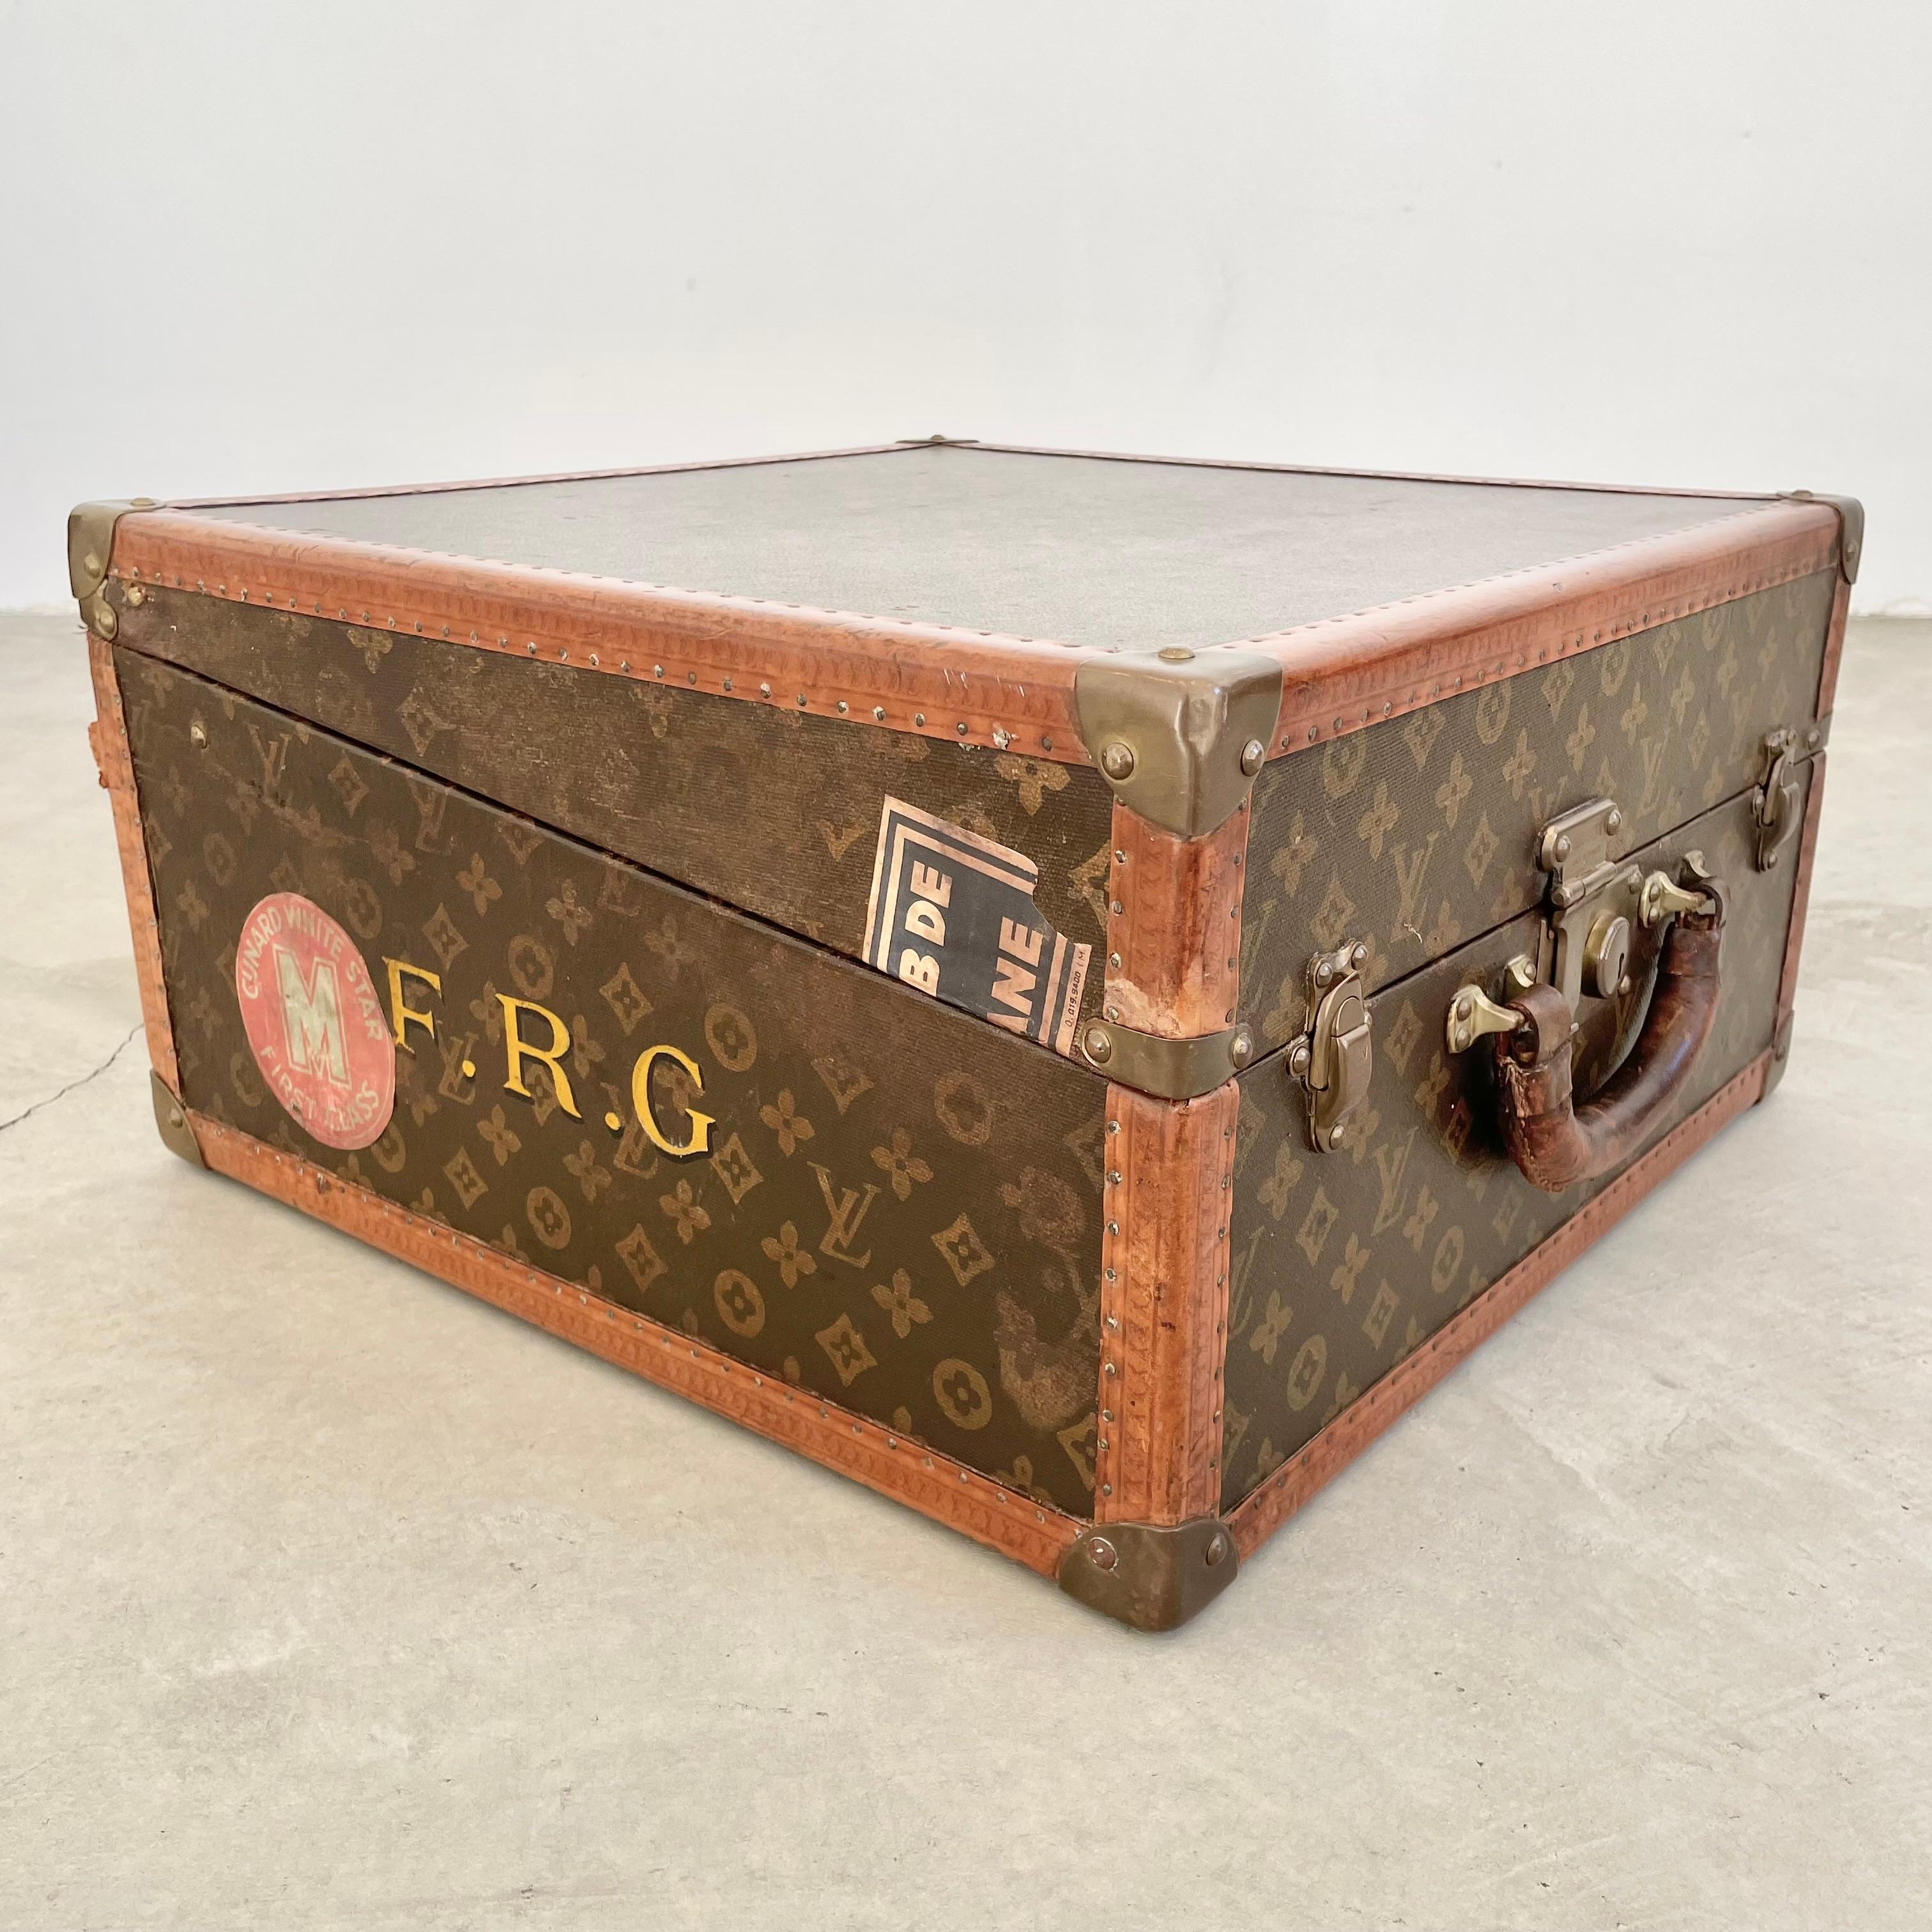 Custom vintage Louis Vuitton trunk from the 1940s. Stunning display piece with irregular shape/opening. Perfect for storing papers, books or small items for trips or in the house. Case has 